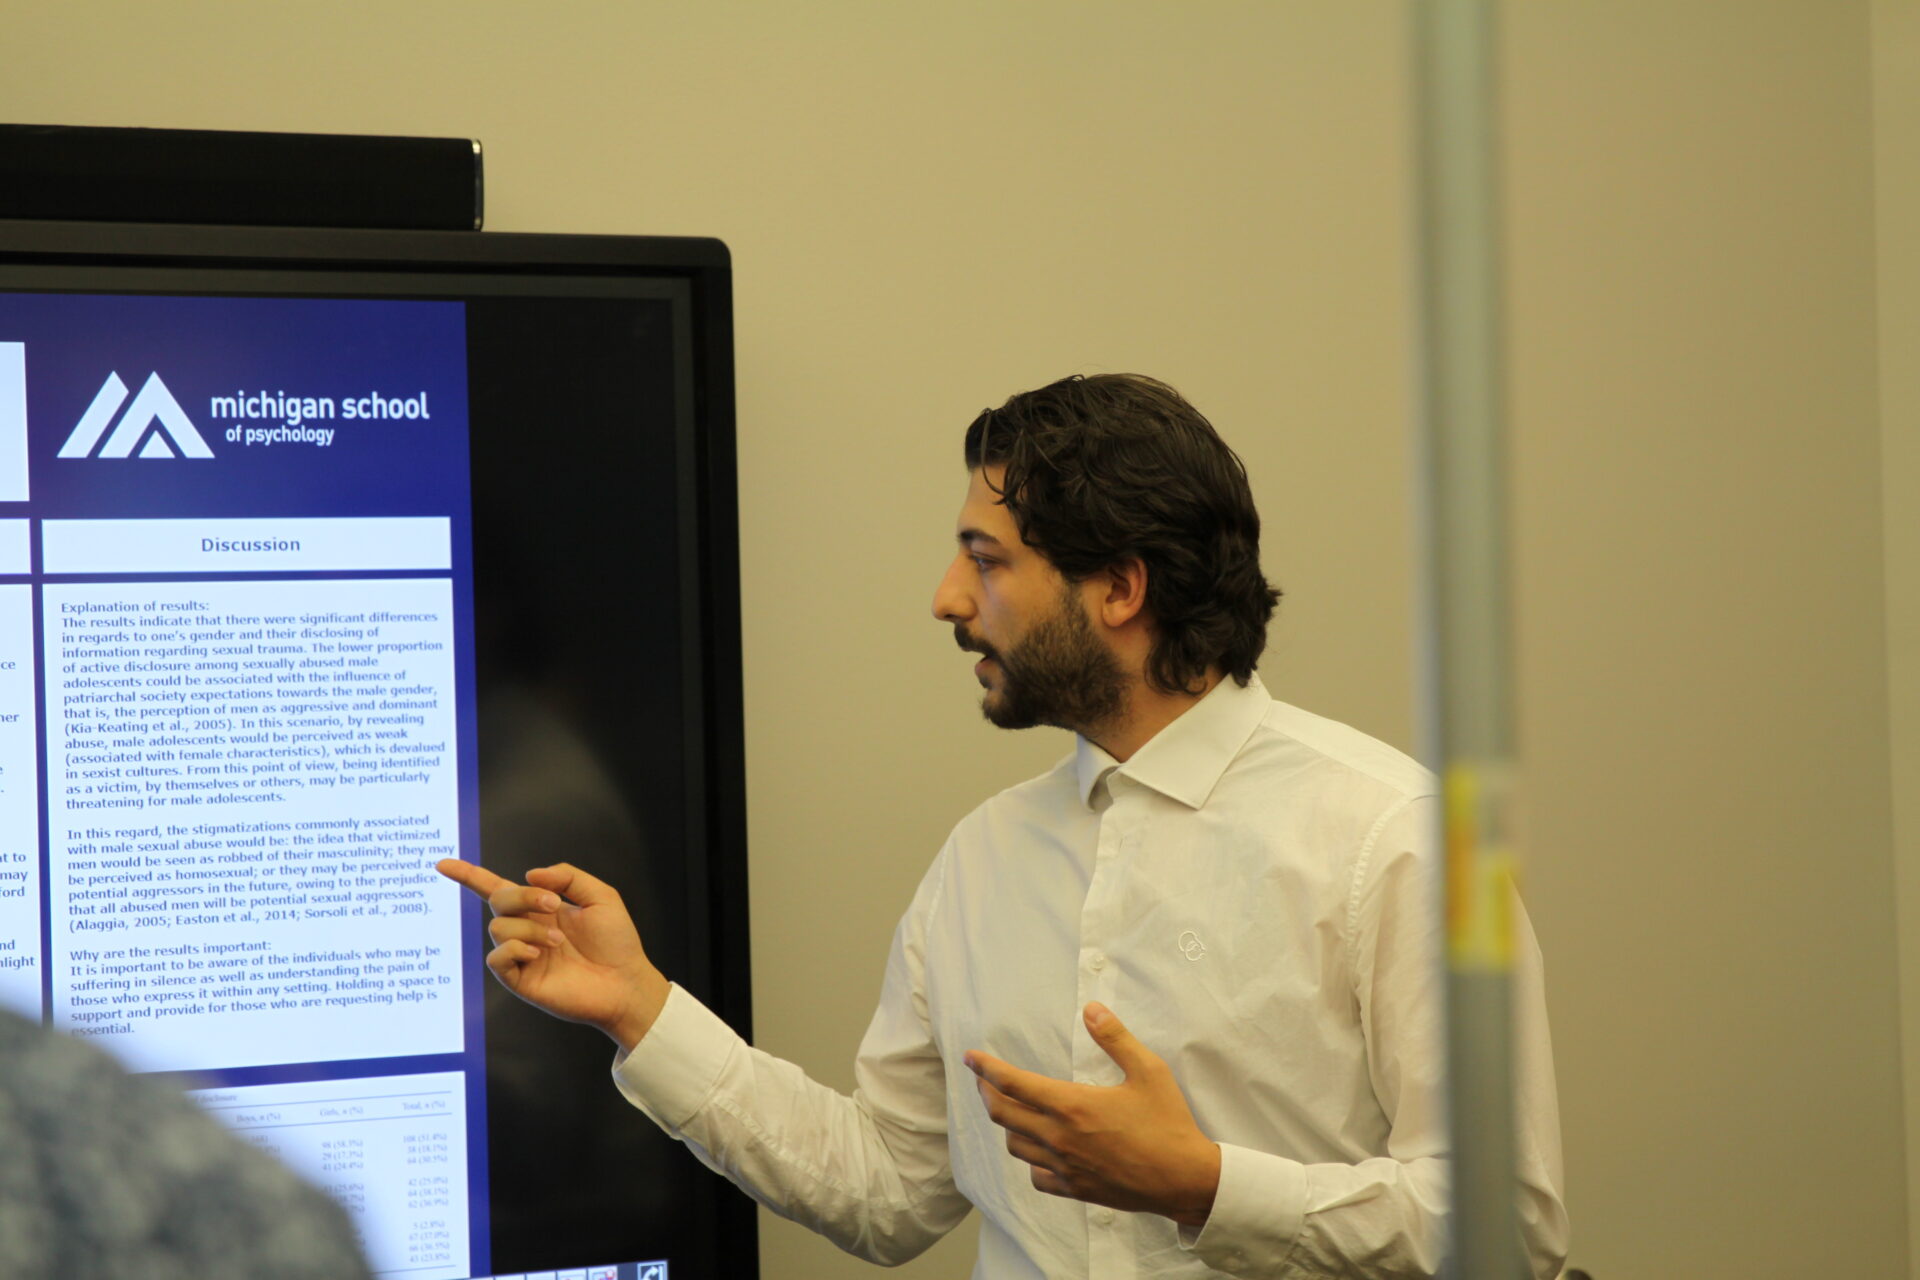 Kareem Daher (MA) presented his poster "A Response to Sexual Trauma Through Gender Differences: How Does Collectivistic Cultures and Honorr-Based Cultures Affect an Individual's Experience of Sexual Trauma?"